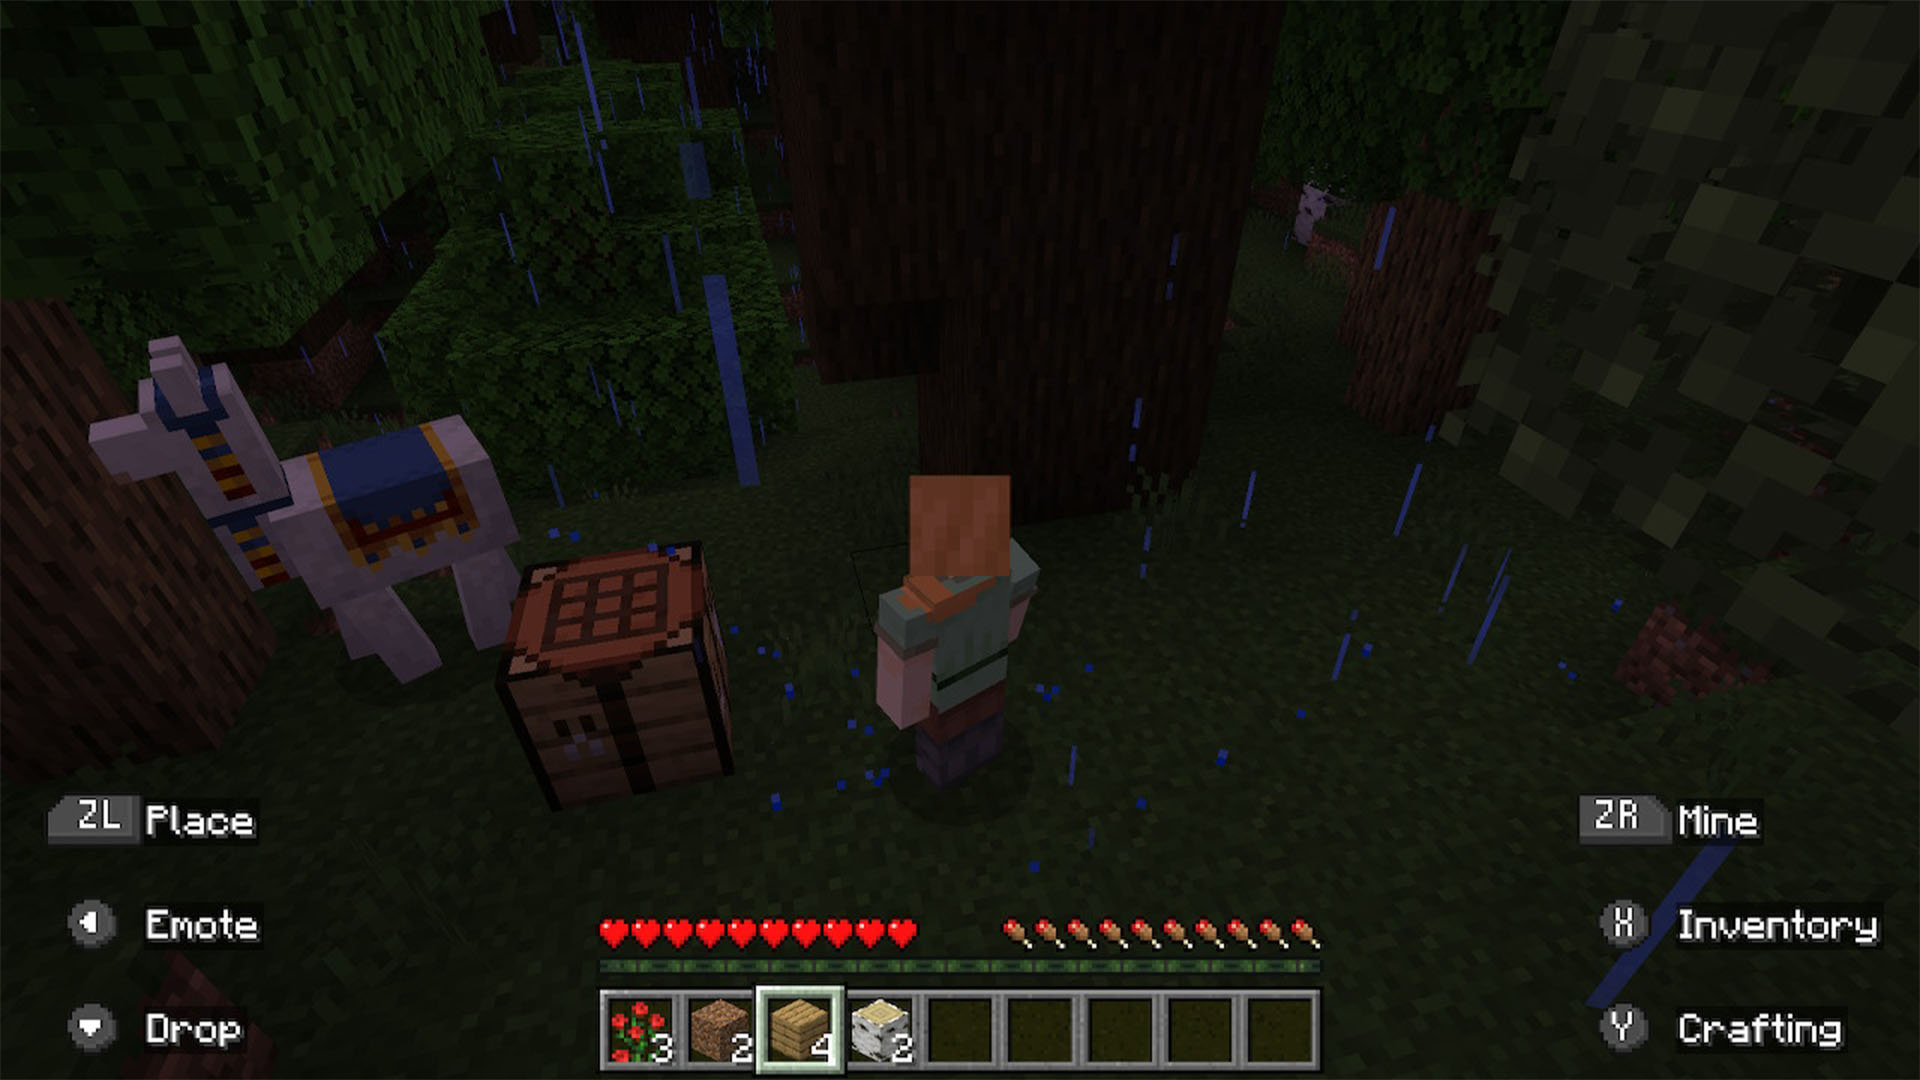 An image of Minecraft gameplay and the inventory